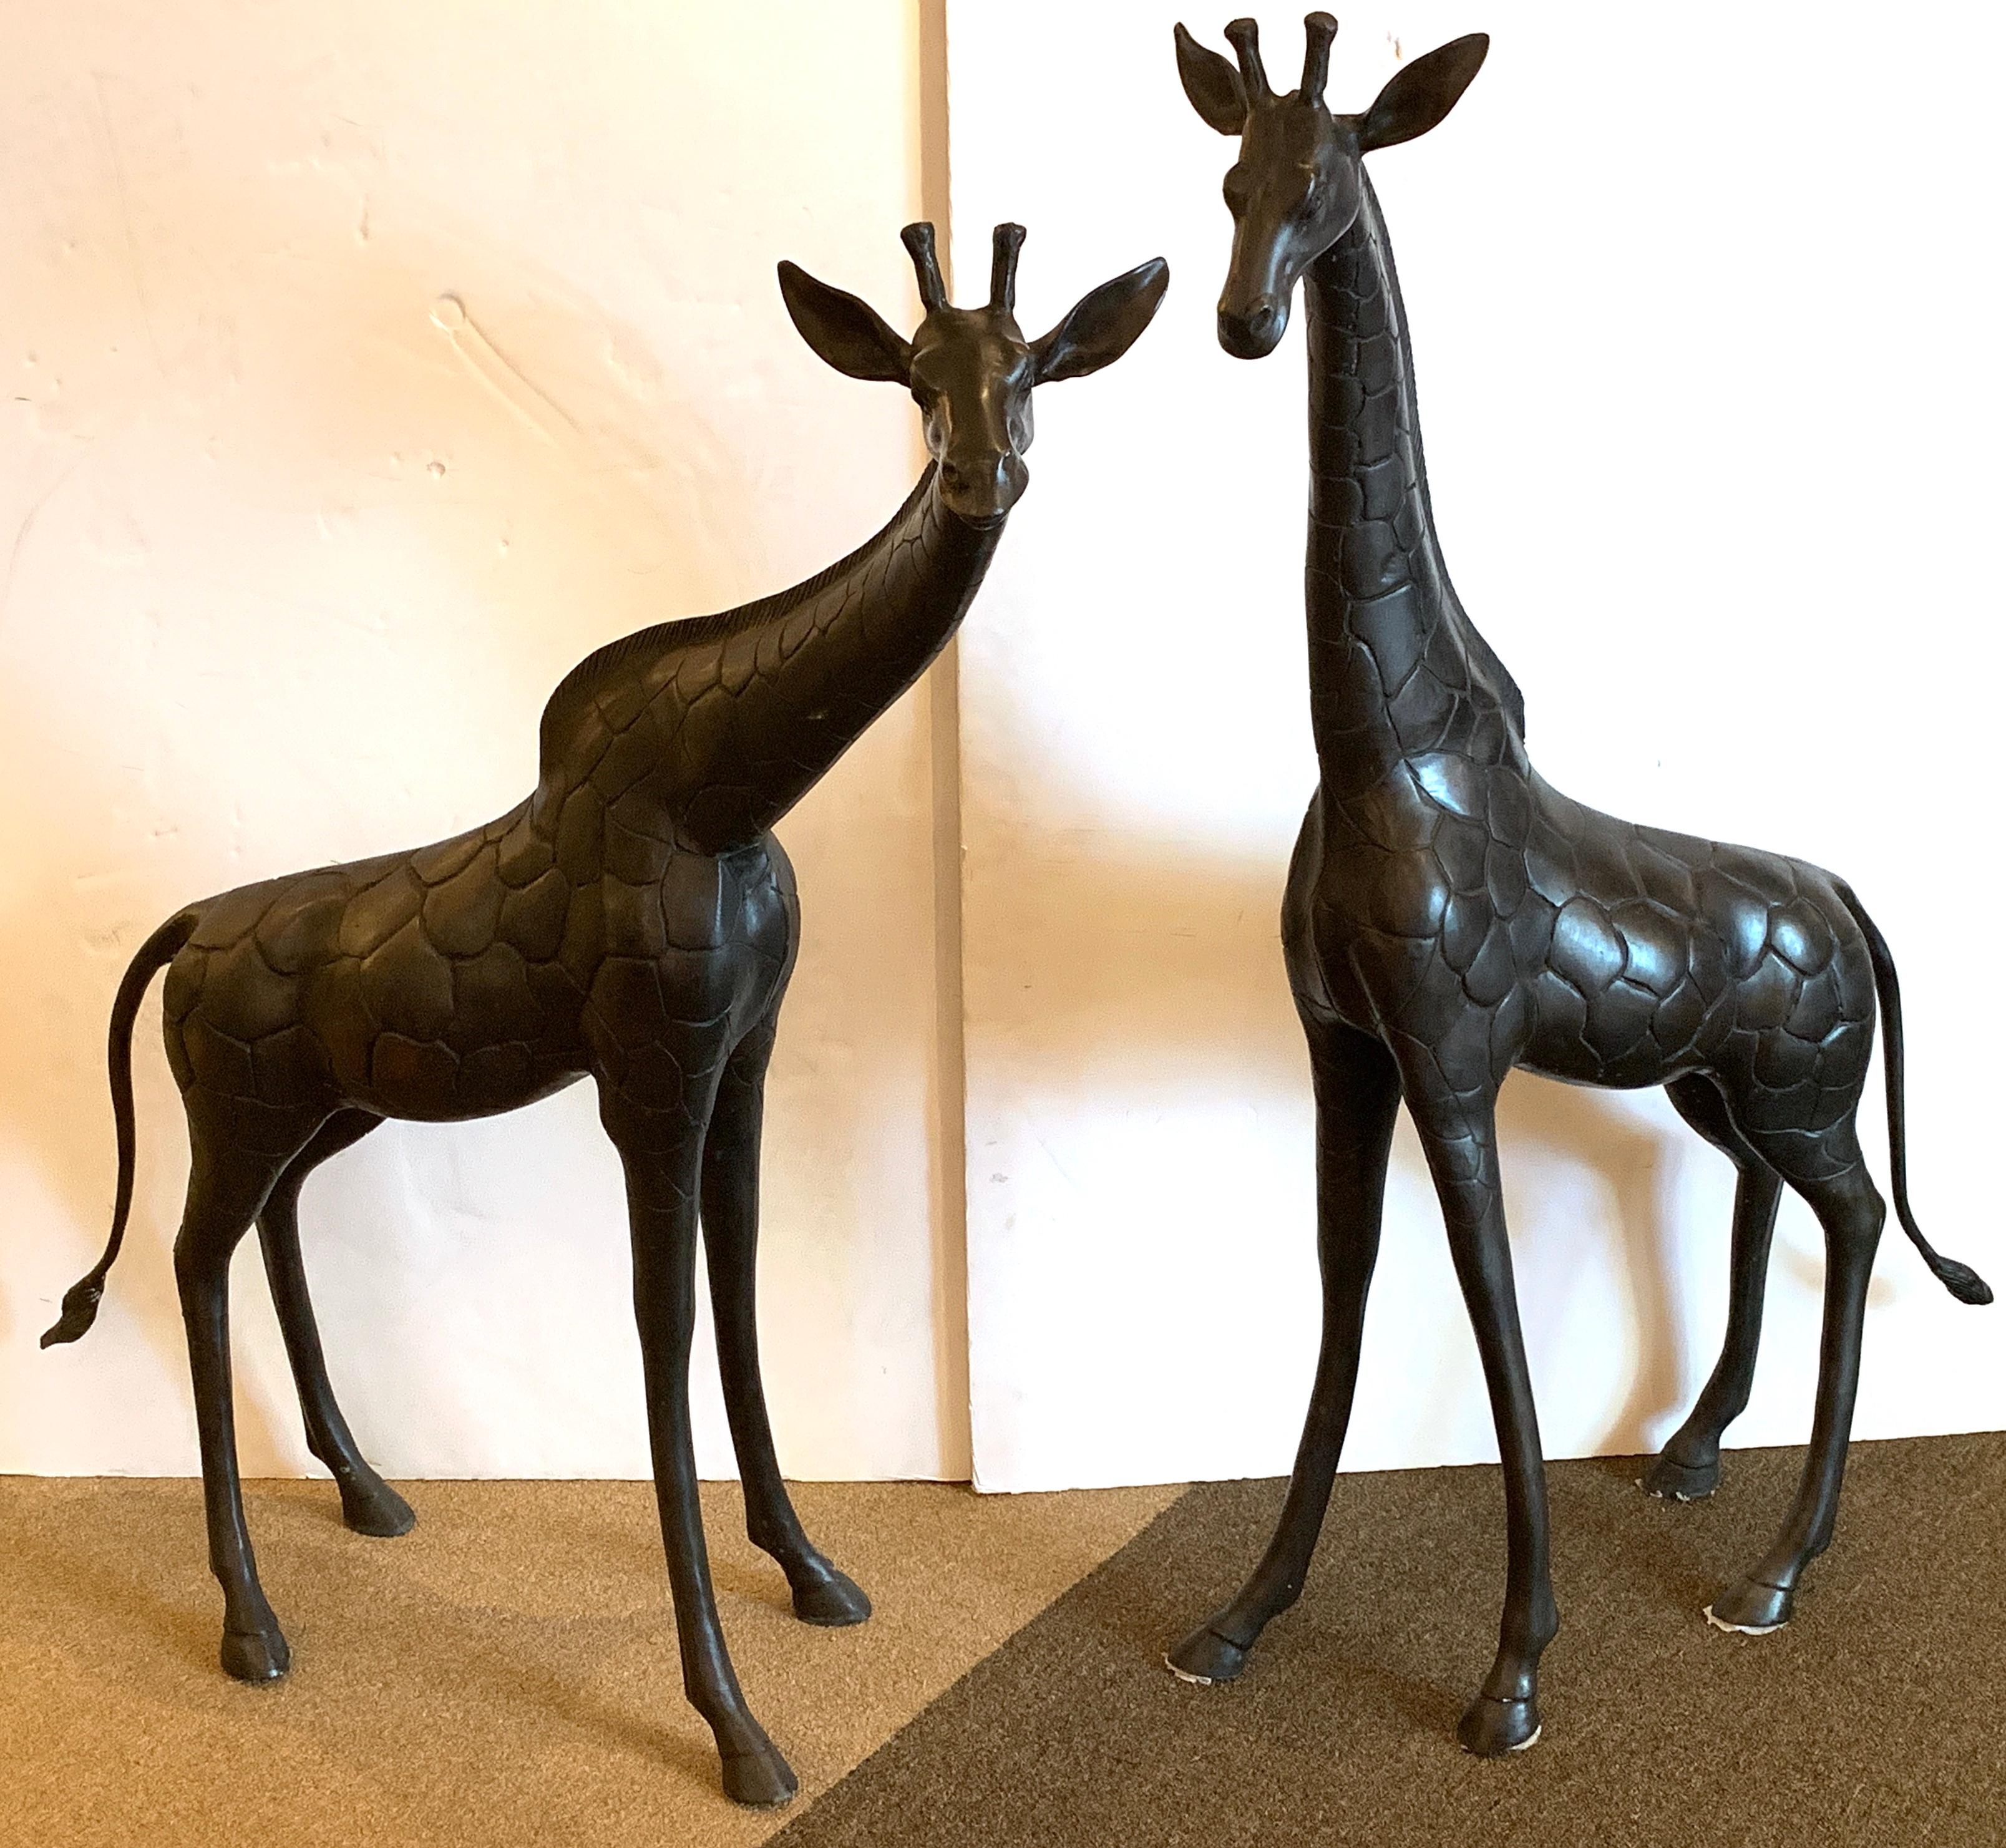 Two large bronze sculptures of giraffes, each one realistically cast and modeled, Unsigned
Measures: Larger giraffe 52